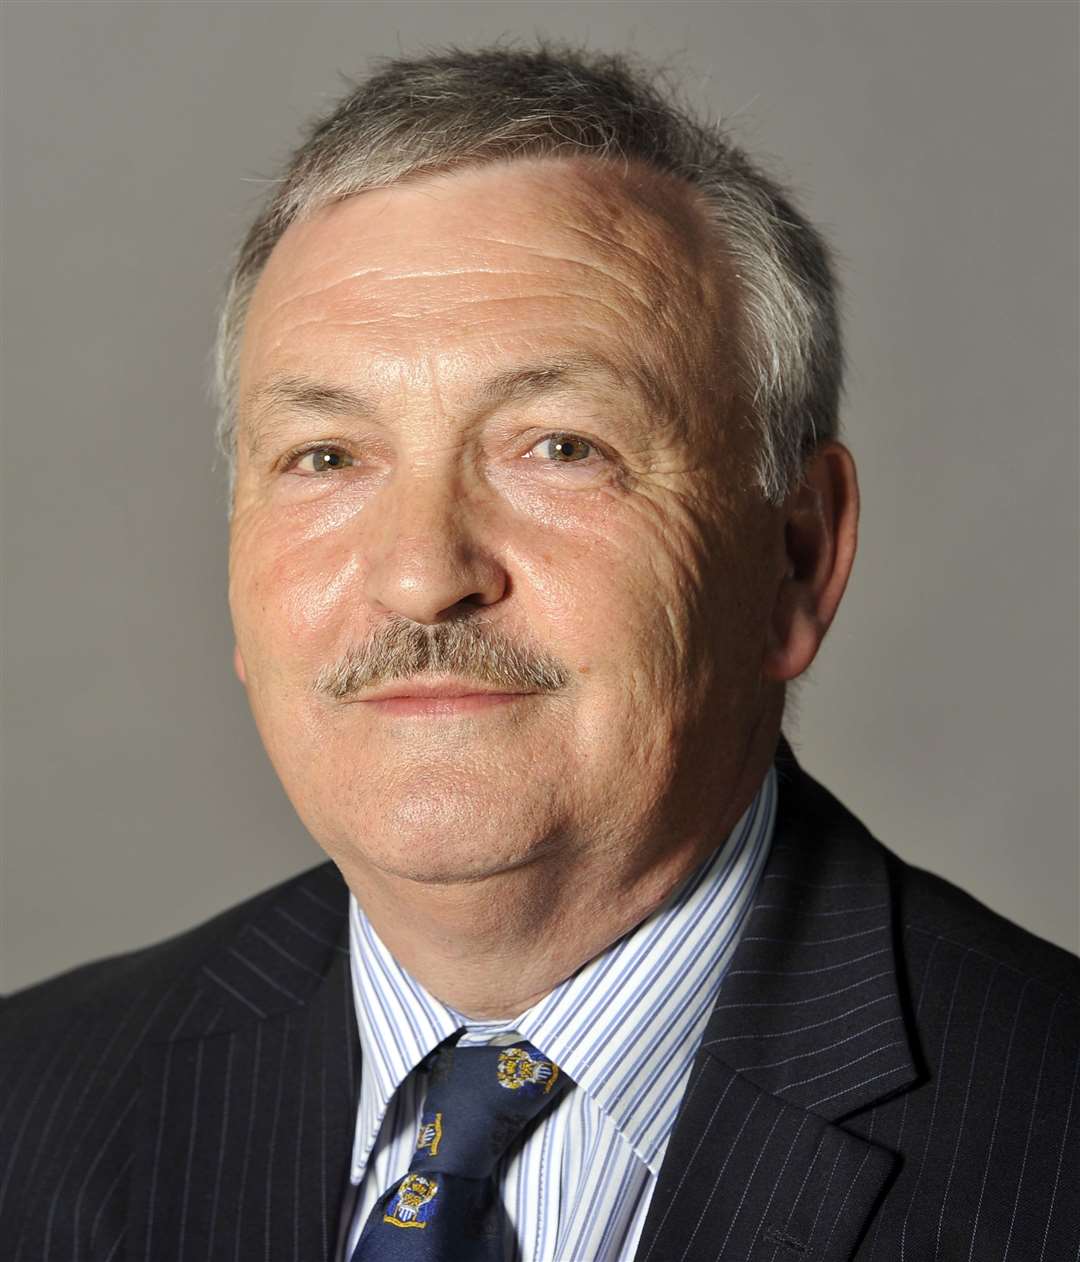 Medway Council leader Alan Jarrett urged residents to continue to follow the guidelines.